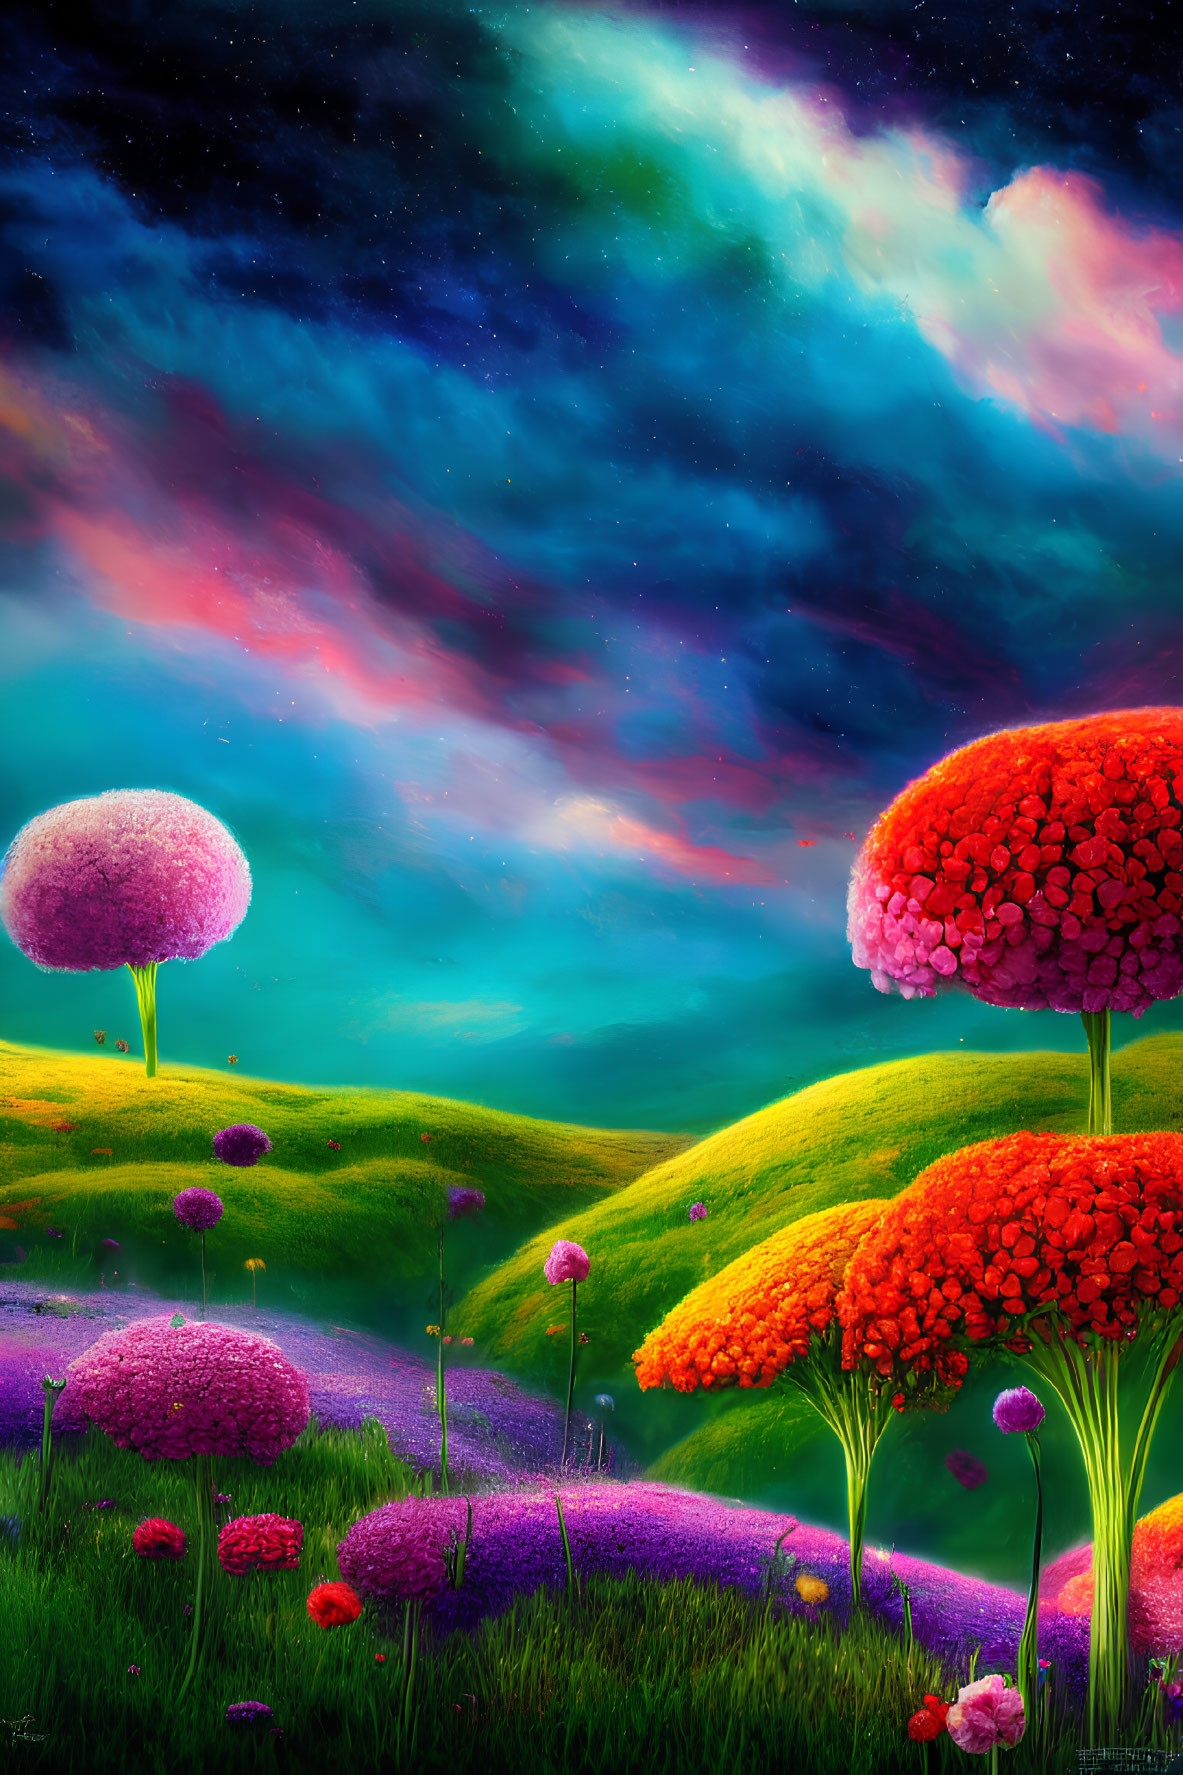 Colorful Landscape with Green Hills, Flower Trees, Starry Sky, and Purple River